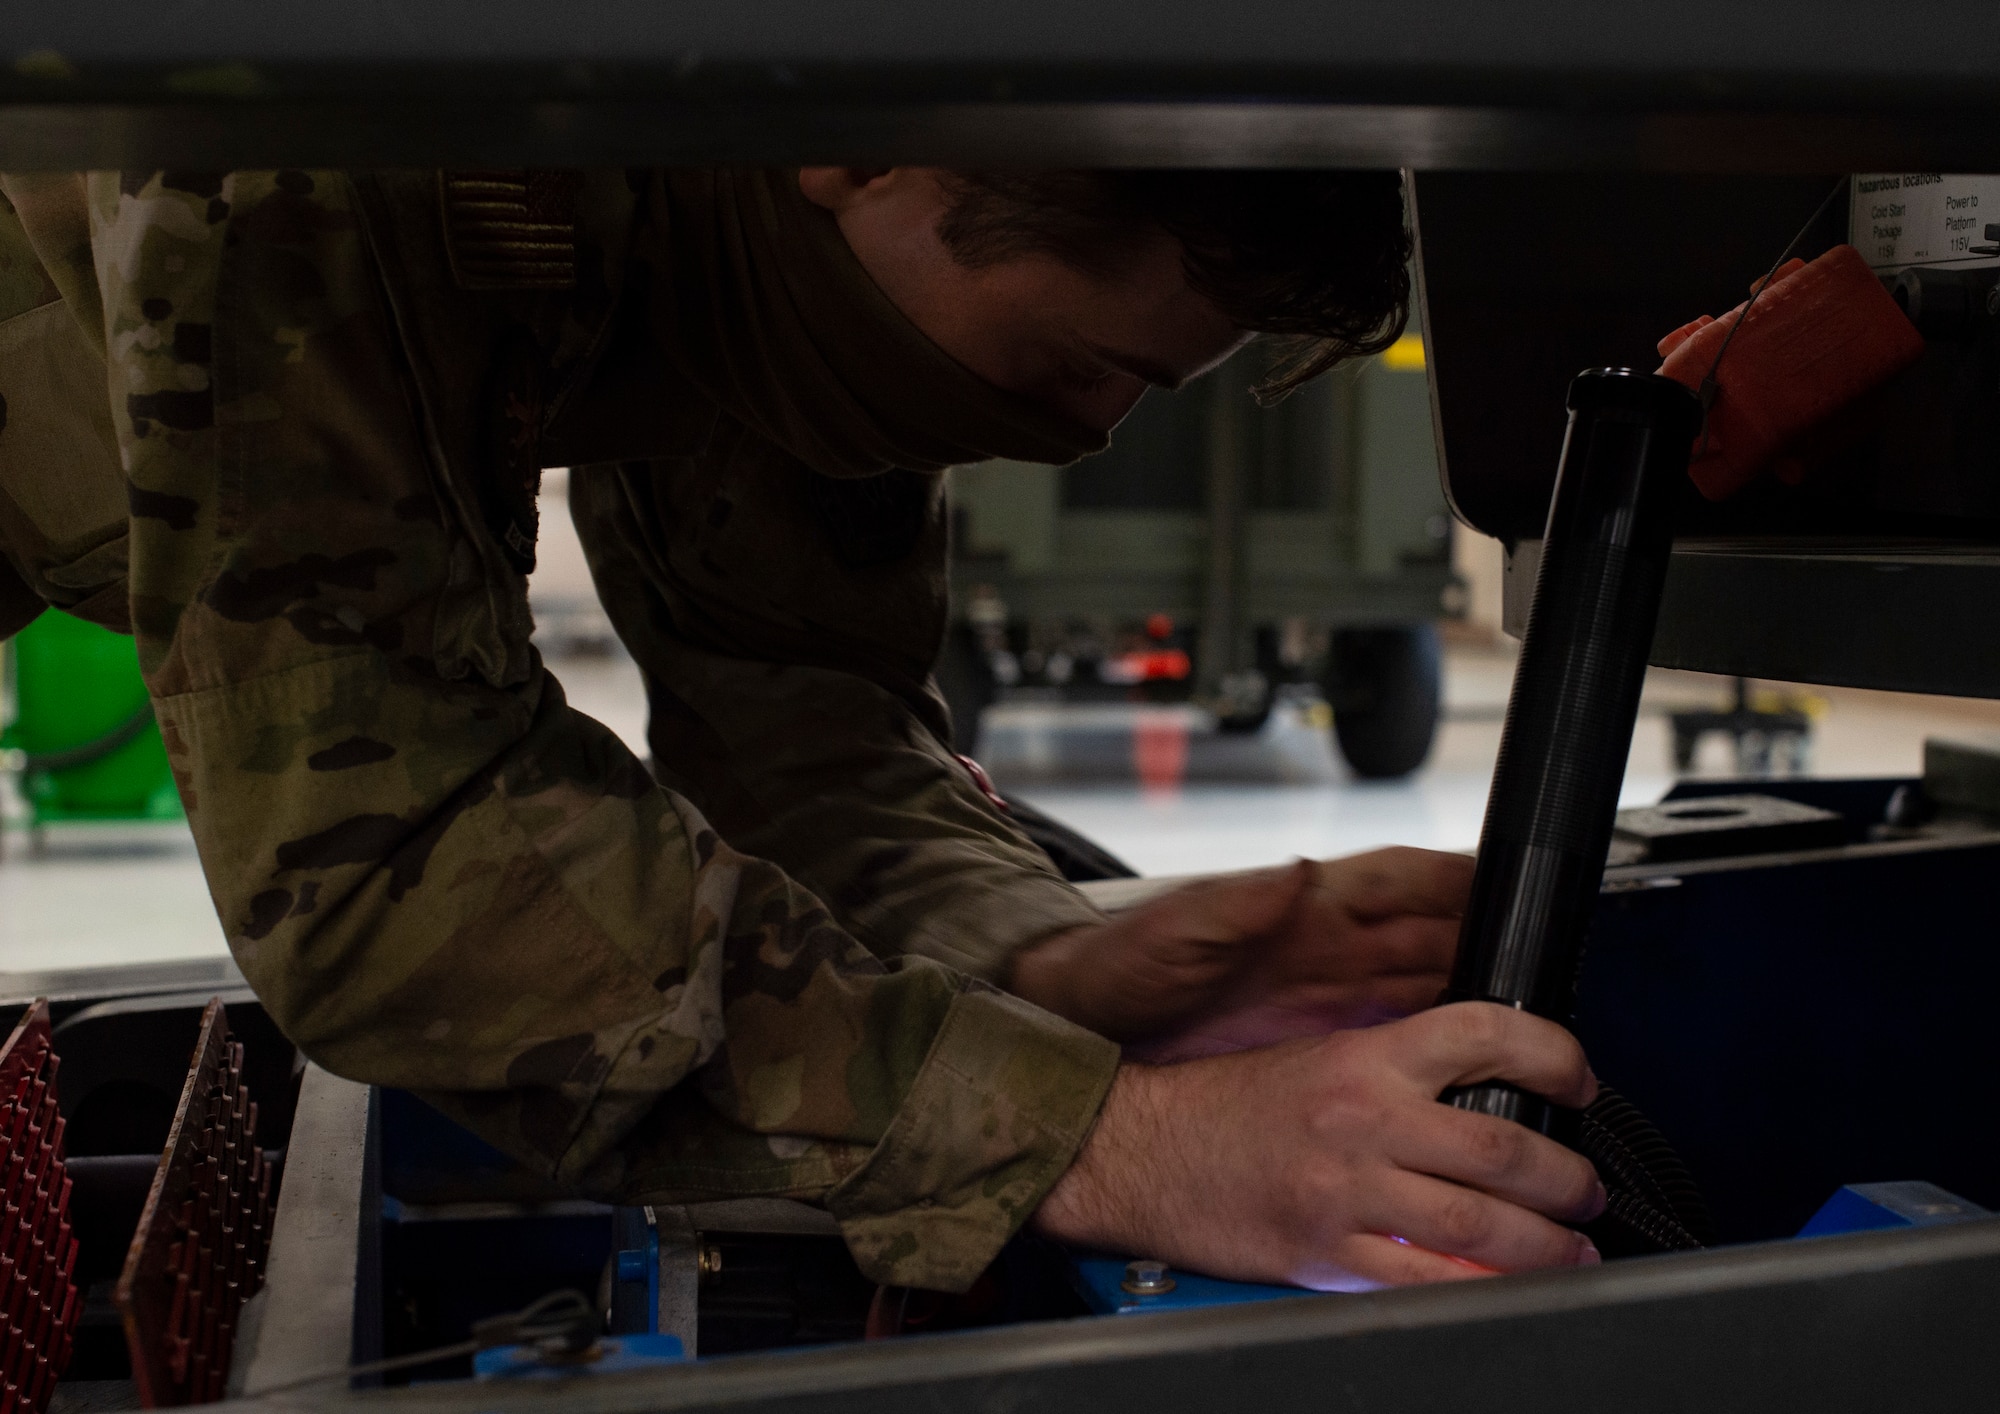 U.S. Air Force Senior Airman Shawn Welch, 62nd Maintenance Squadron Aerospace Ground Equipment Flight, inspects the engine compartment of a man lift vehicle at Joint Base Lewis-McChord, Washington, April 7, 2021. The 62nd MXS AGE flight oversees all the equipment used to inspect, fix and maintain aircraft at McChord Field. (U.S. Air Force photo by Senior Airman Tryphena Mayhugh)